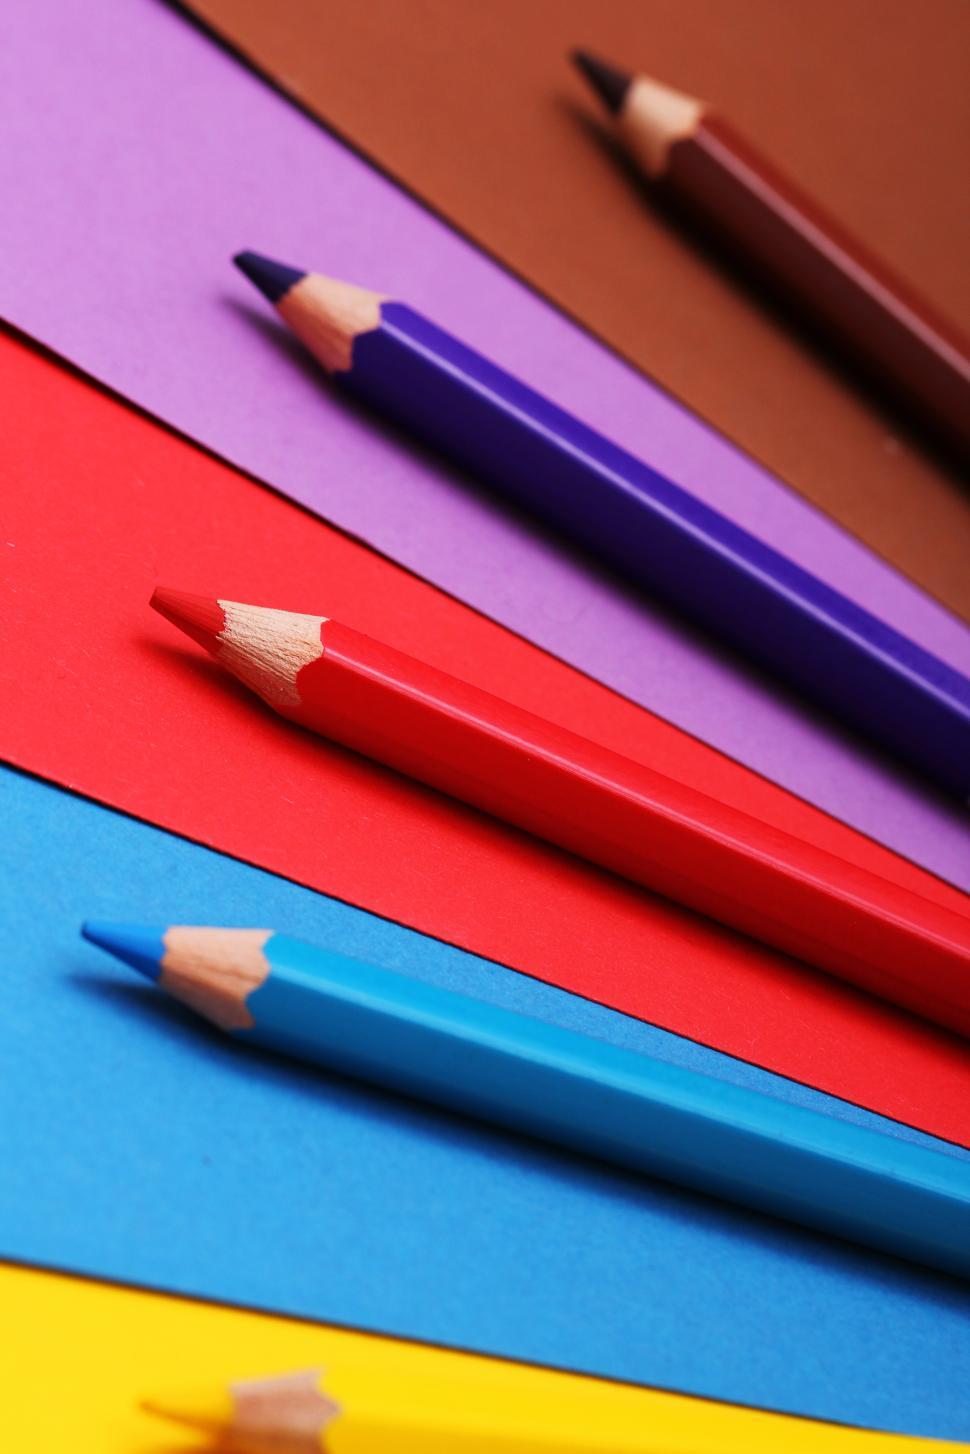 Free Image of Art pencils on colorful construction paper 